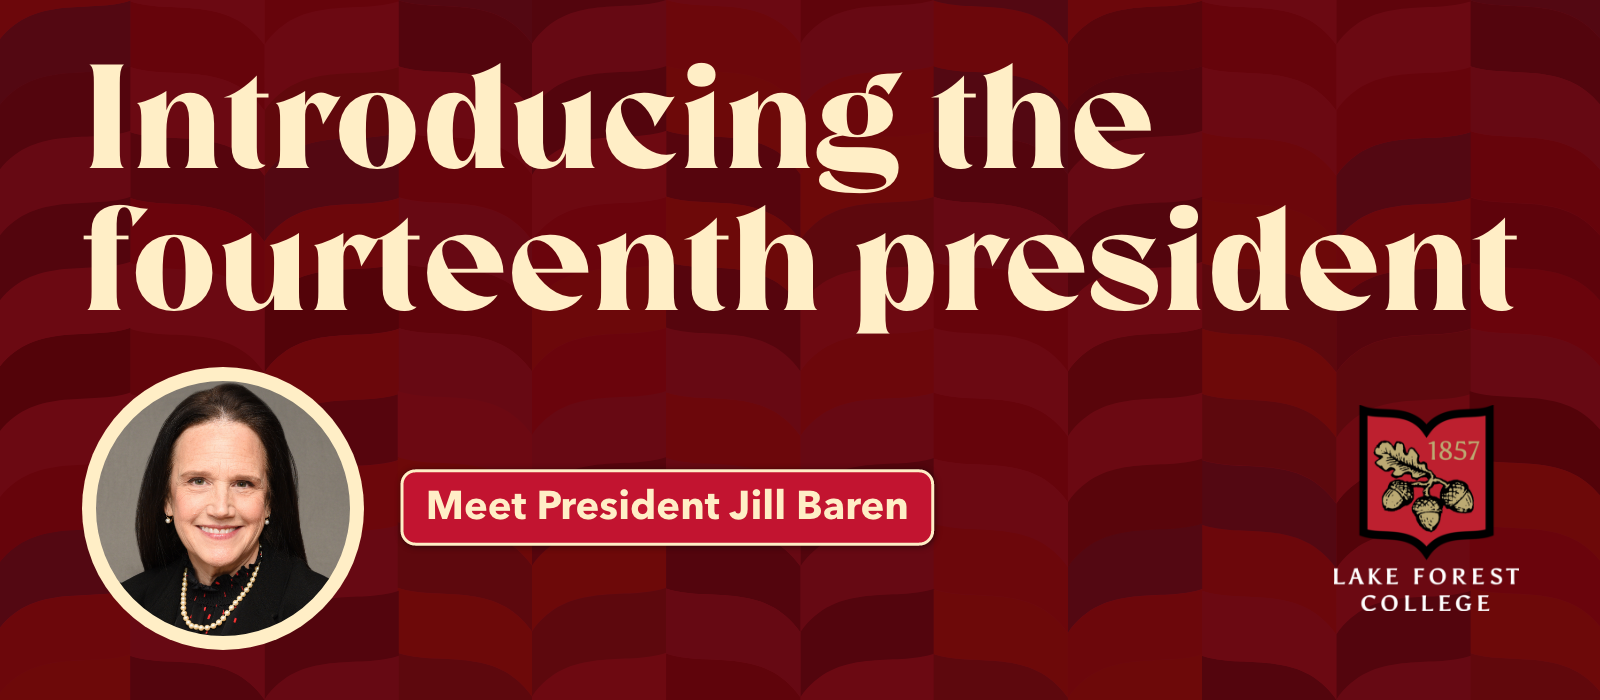 Introducing Dr. Jill Baren, the Fourteenth President of Lake Forest College